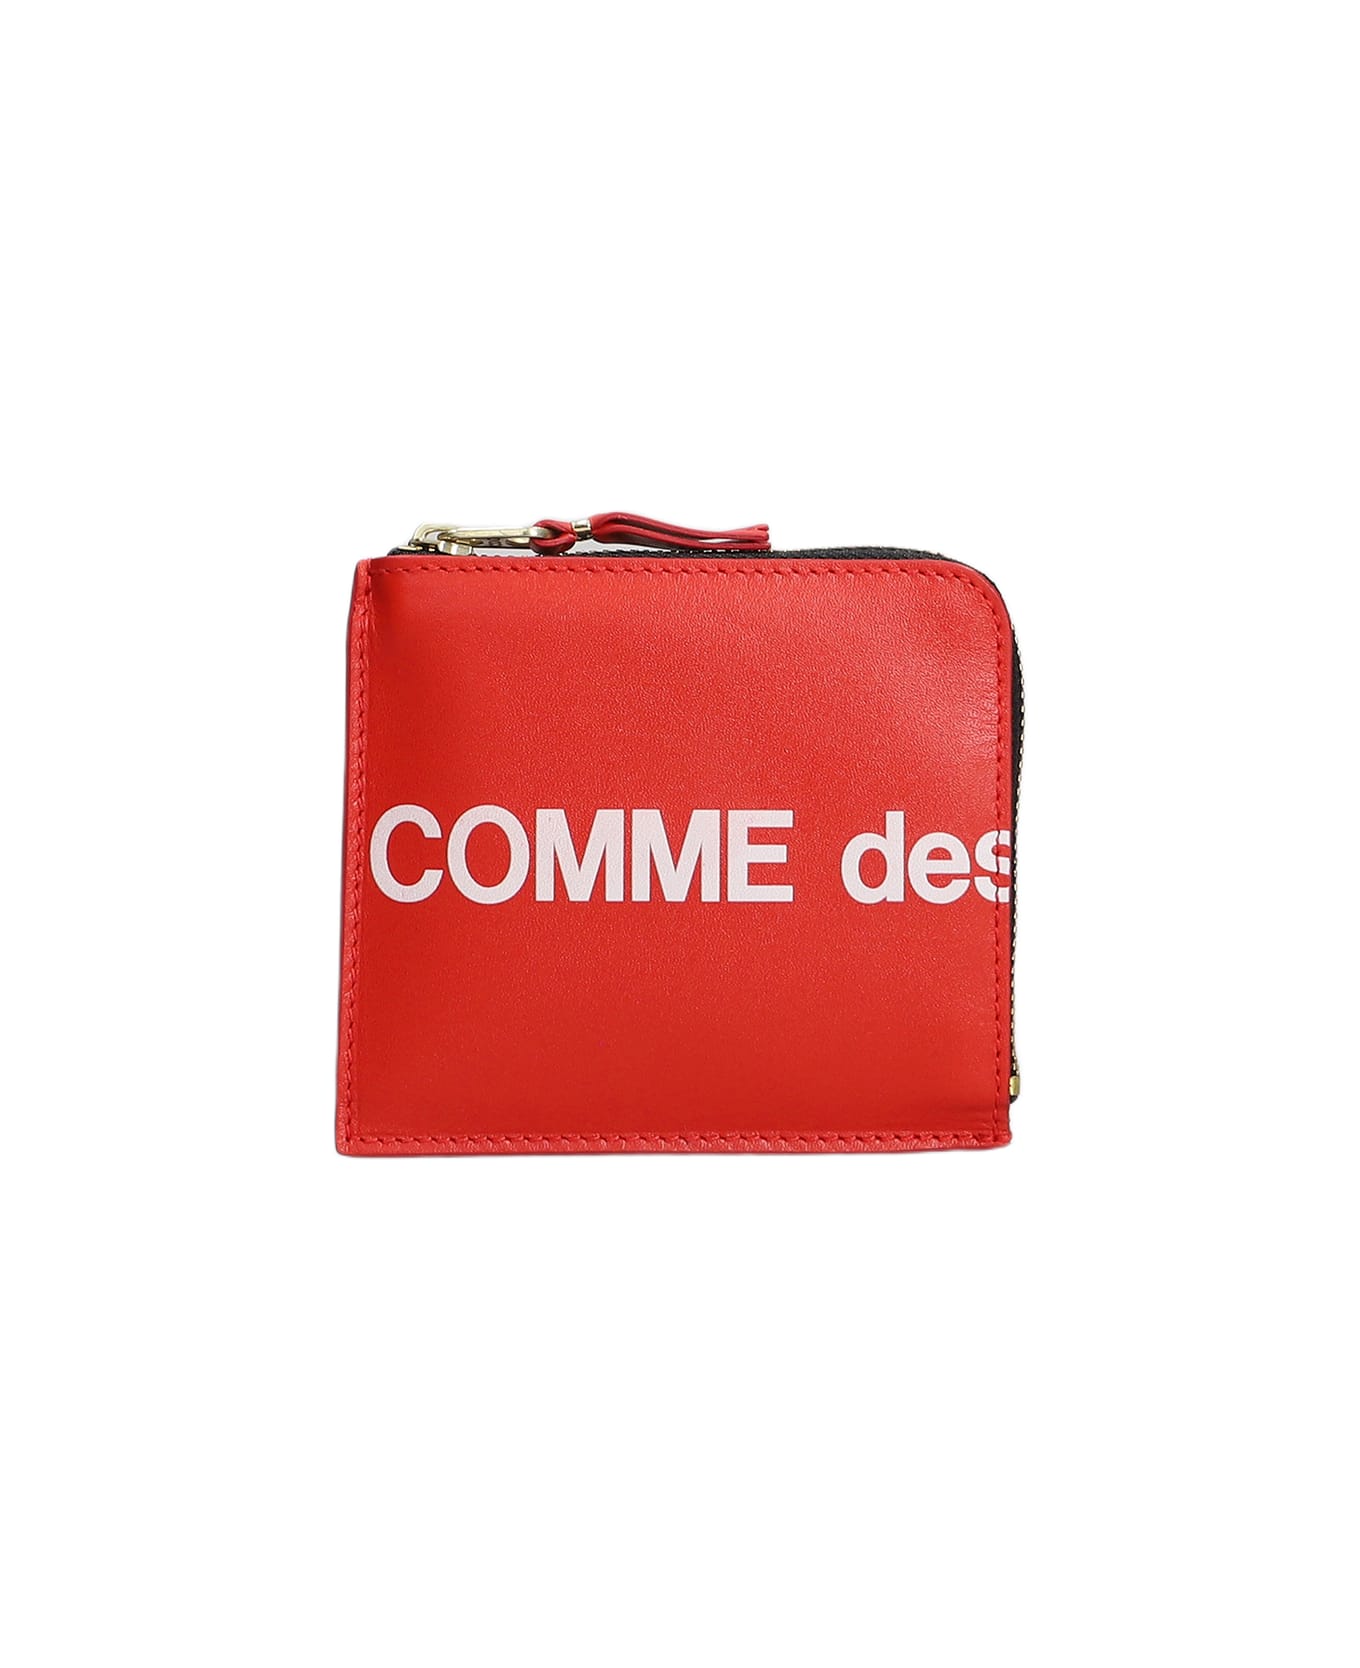 Comme des Garçons Wallet Wallet In Red Leather - red 財布